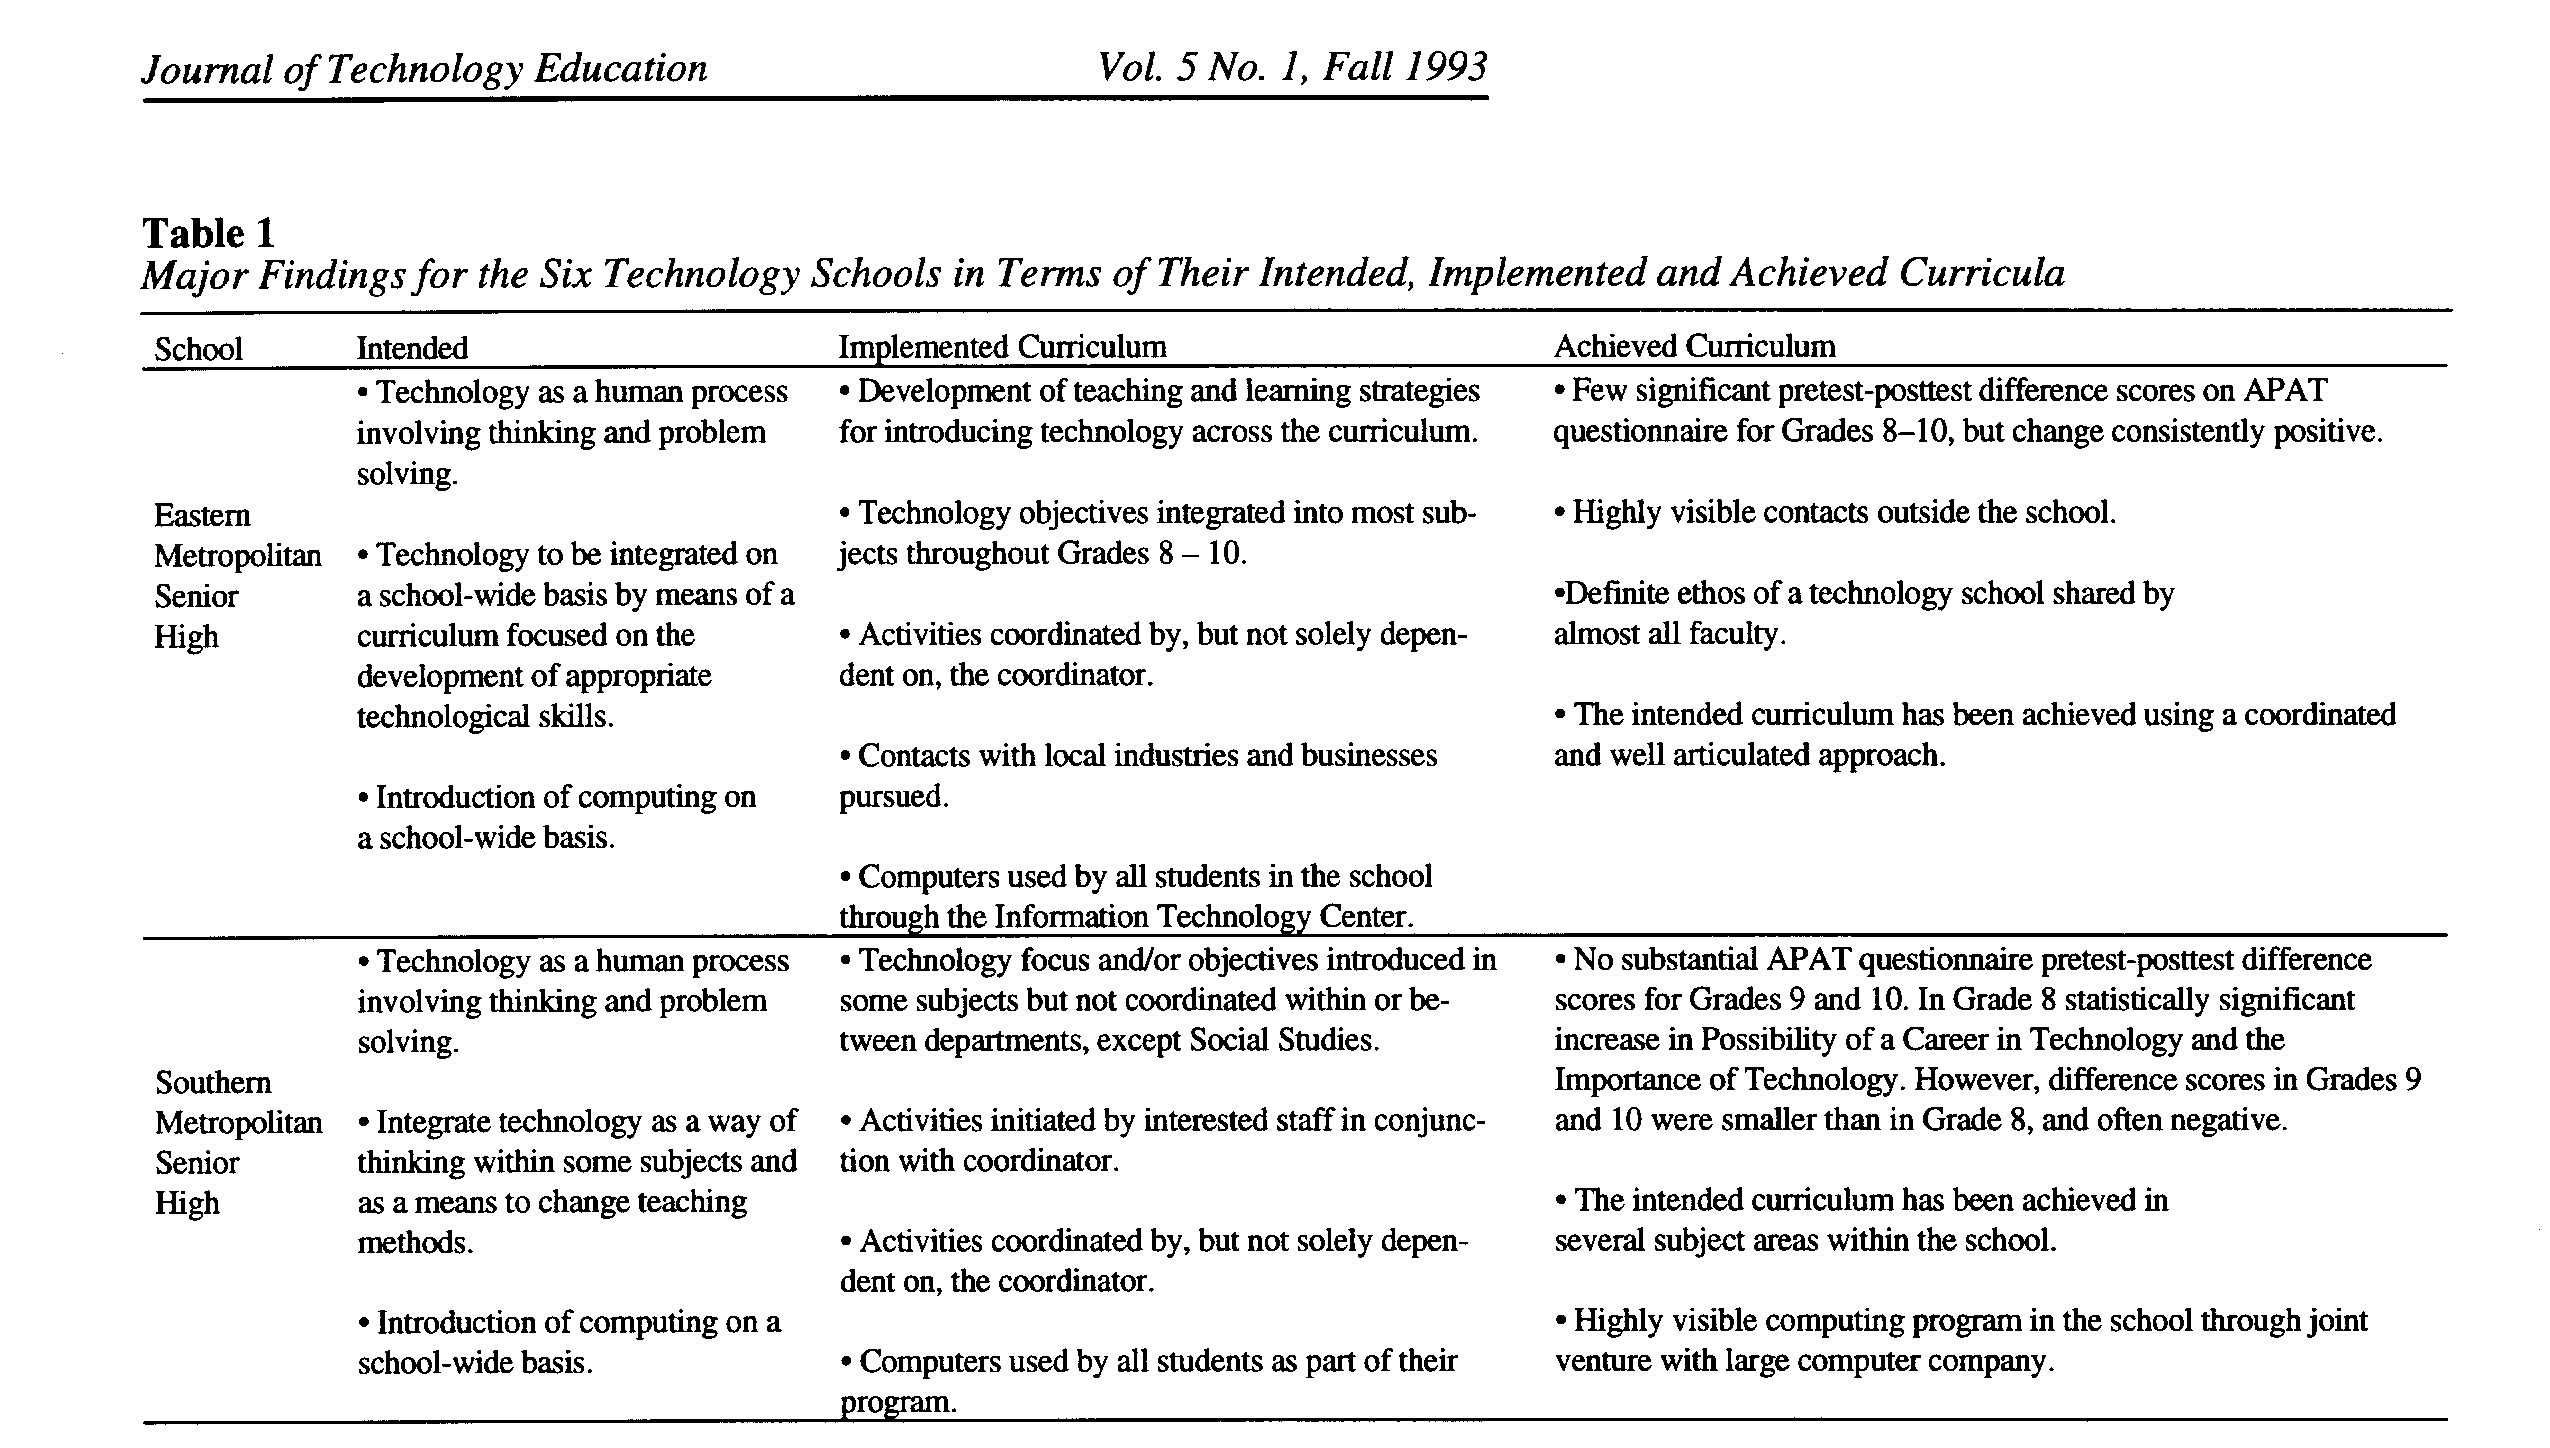 Table 1. Major Findings for the Six Technology Schools in Terms of Their Intended, Implemented and Achieved Curricula